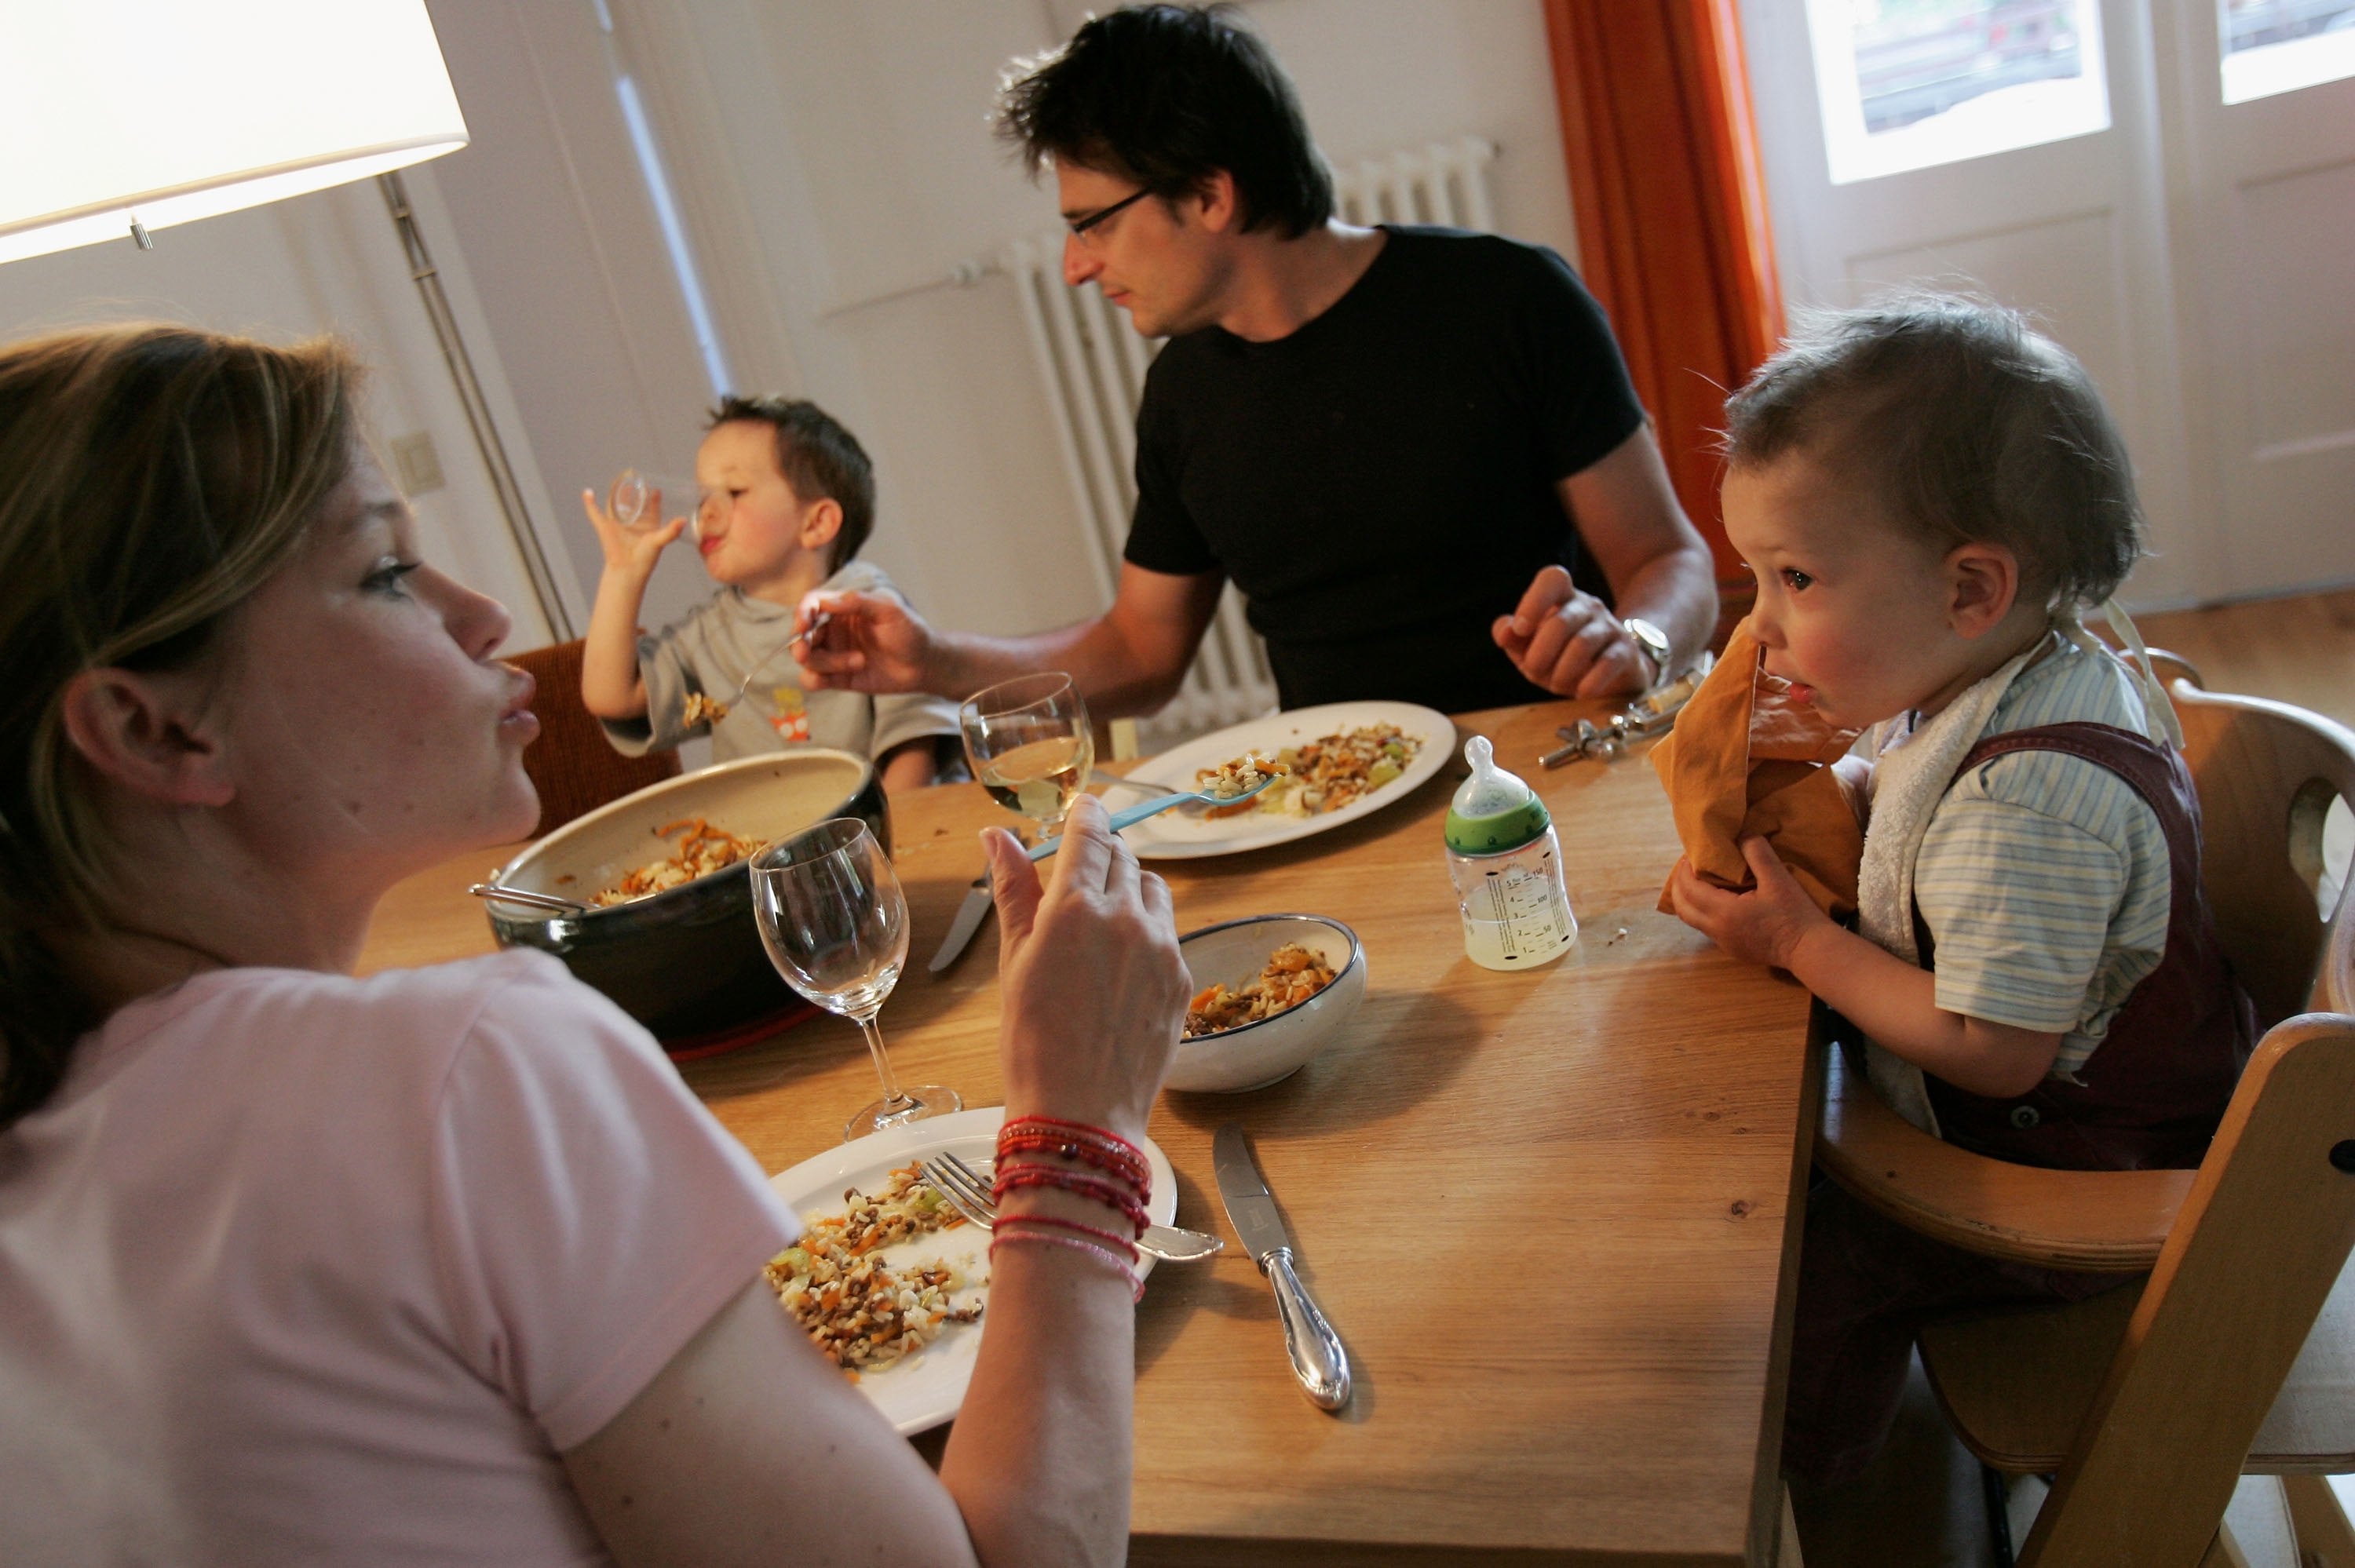 The pandemic has made many miss family meals